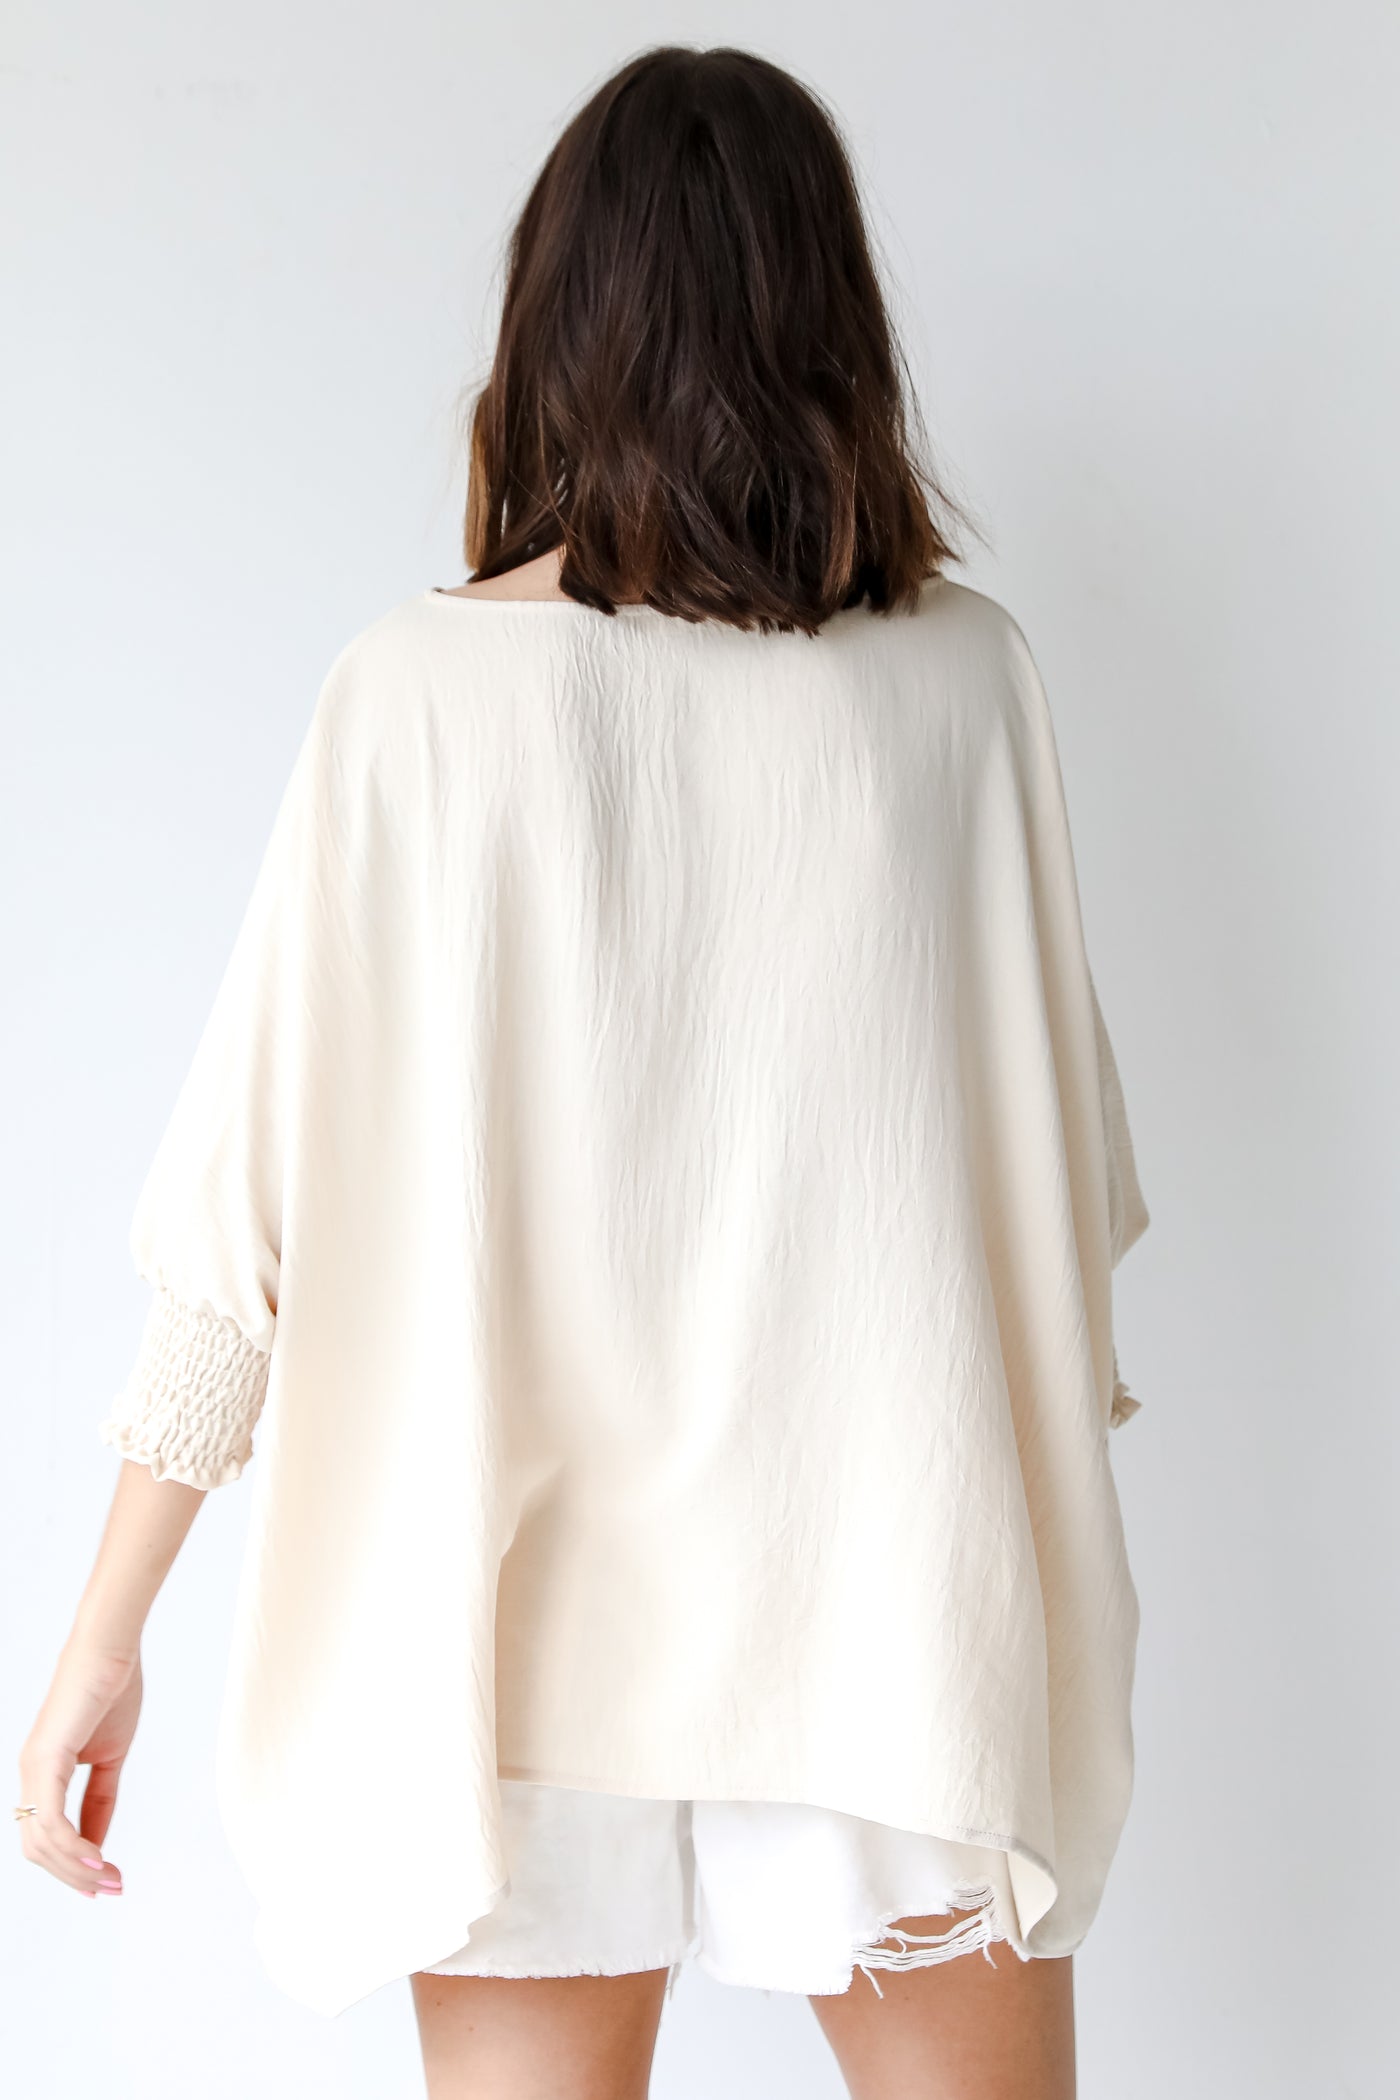 Blouse in natural back view